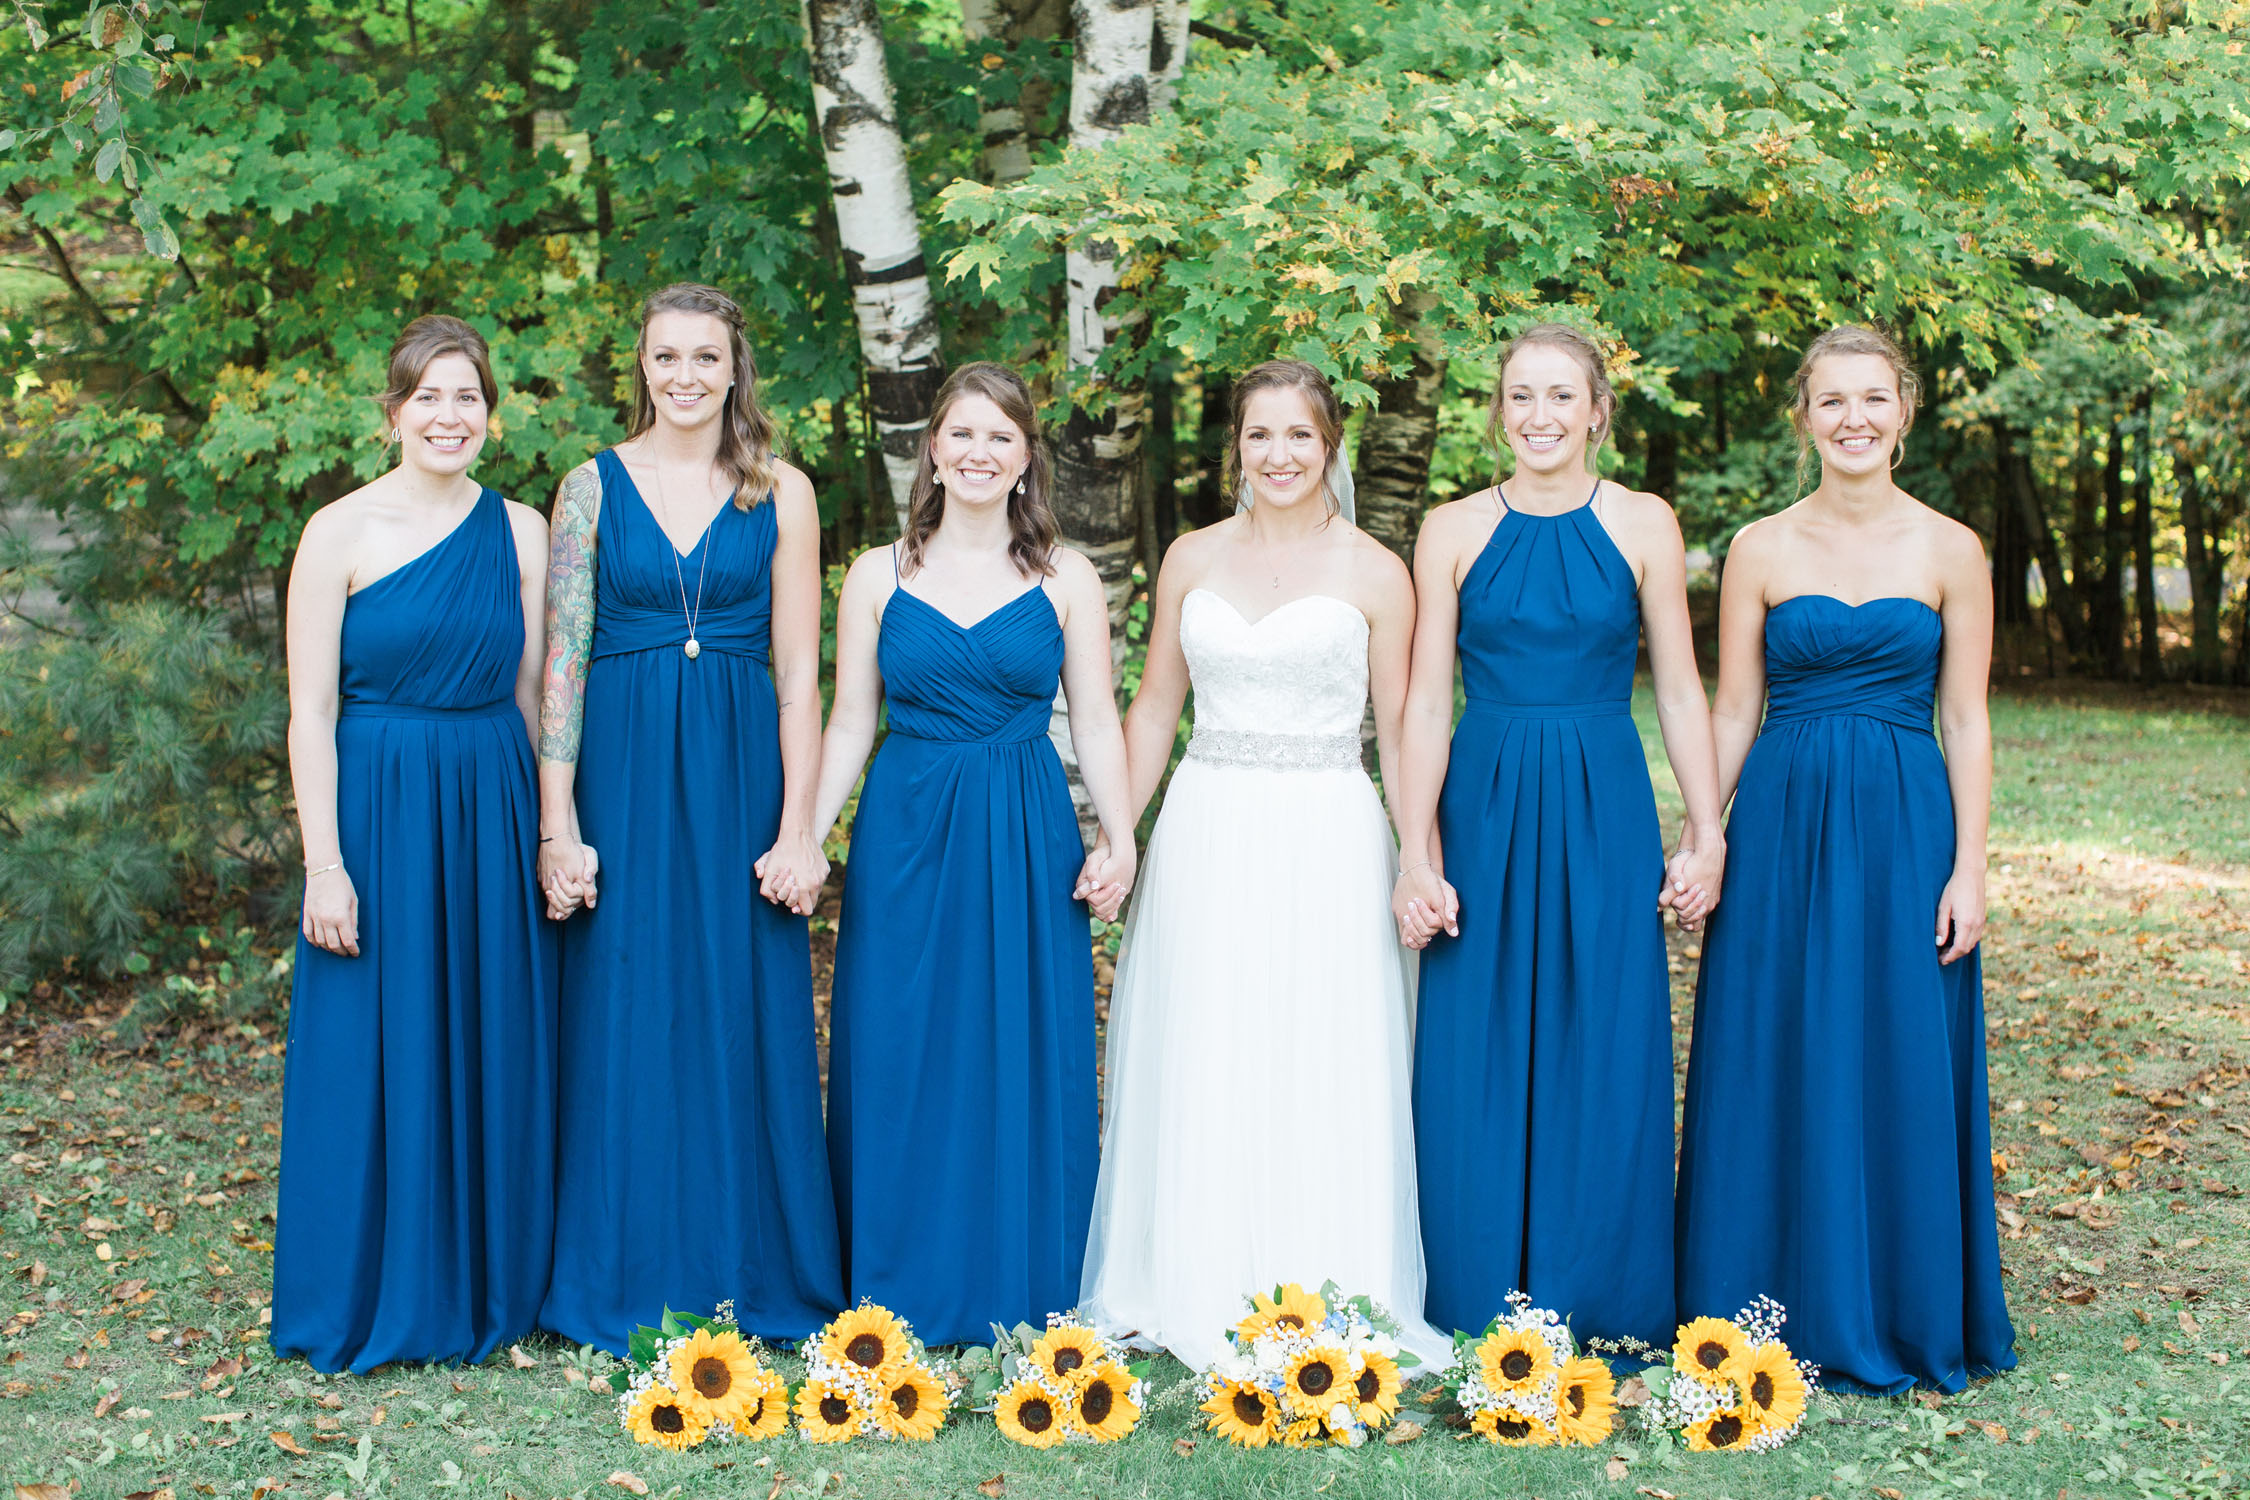 Bride and bridemaids dressed in blue with sunflowers.